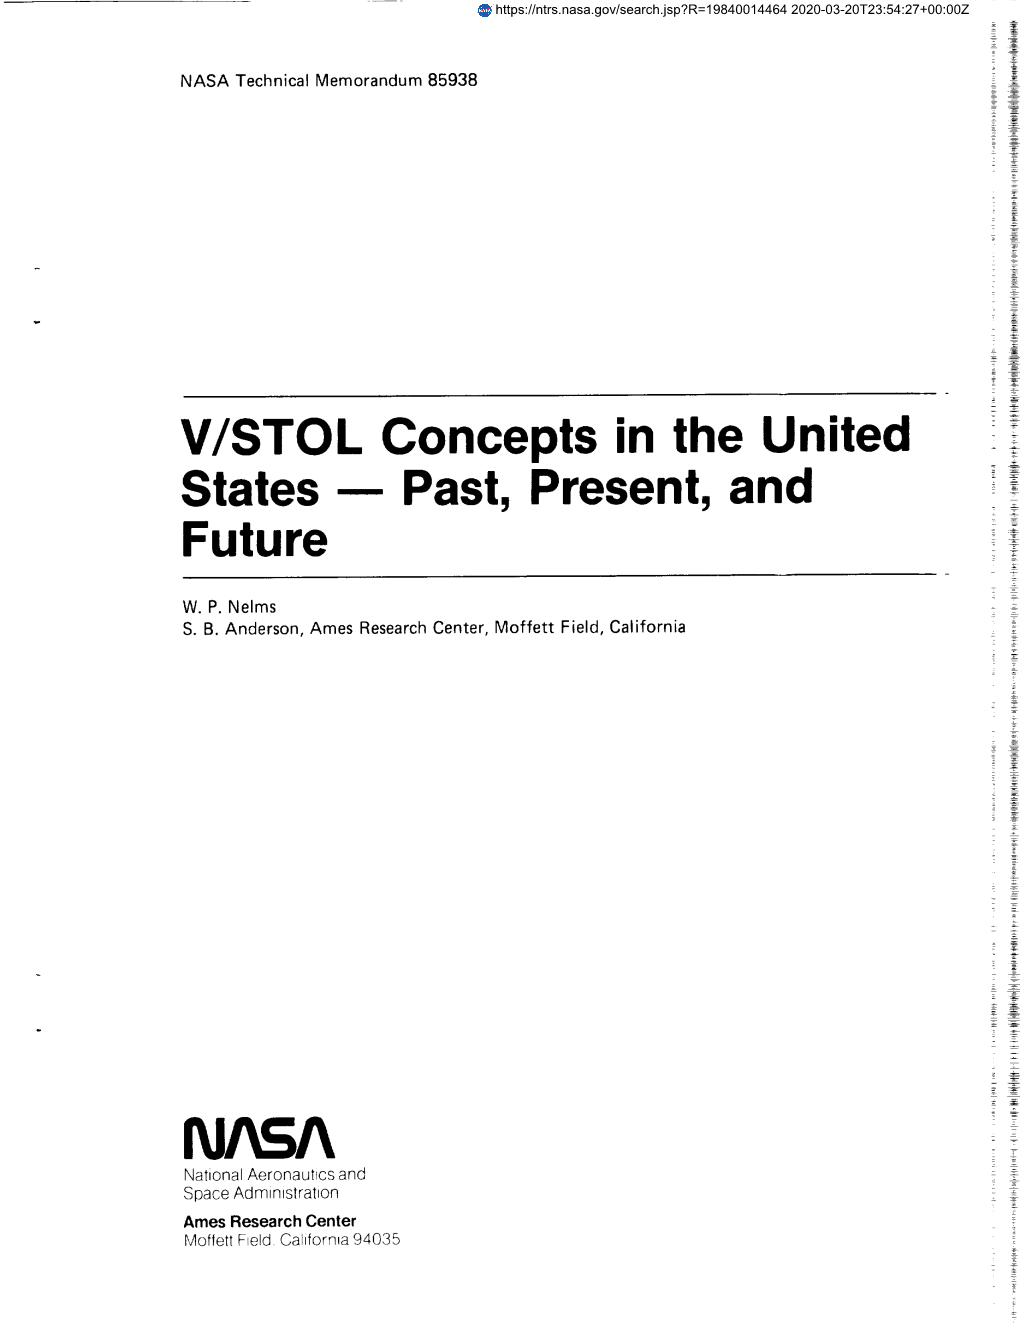 V/STOL Concepts in the United States-- Past, Present, and Future